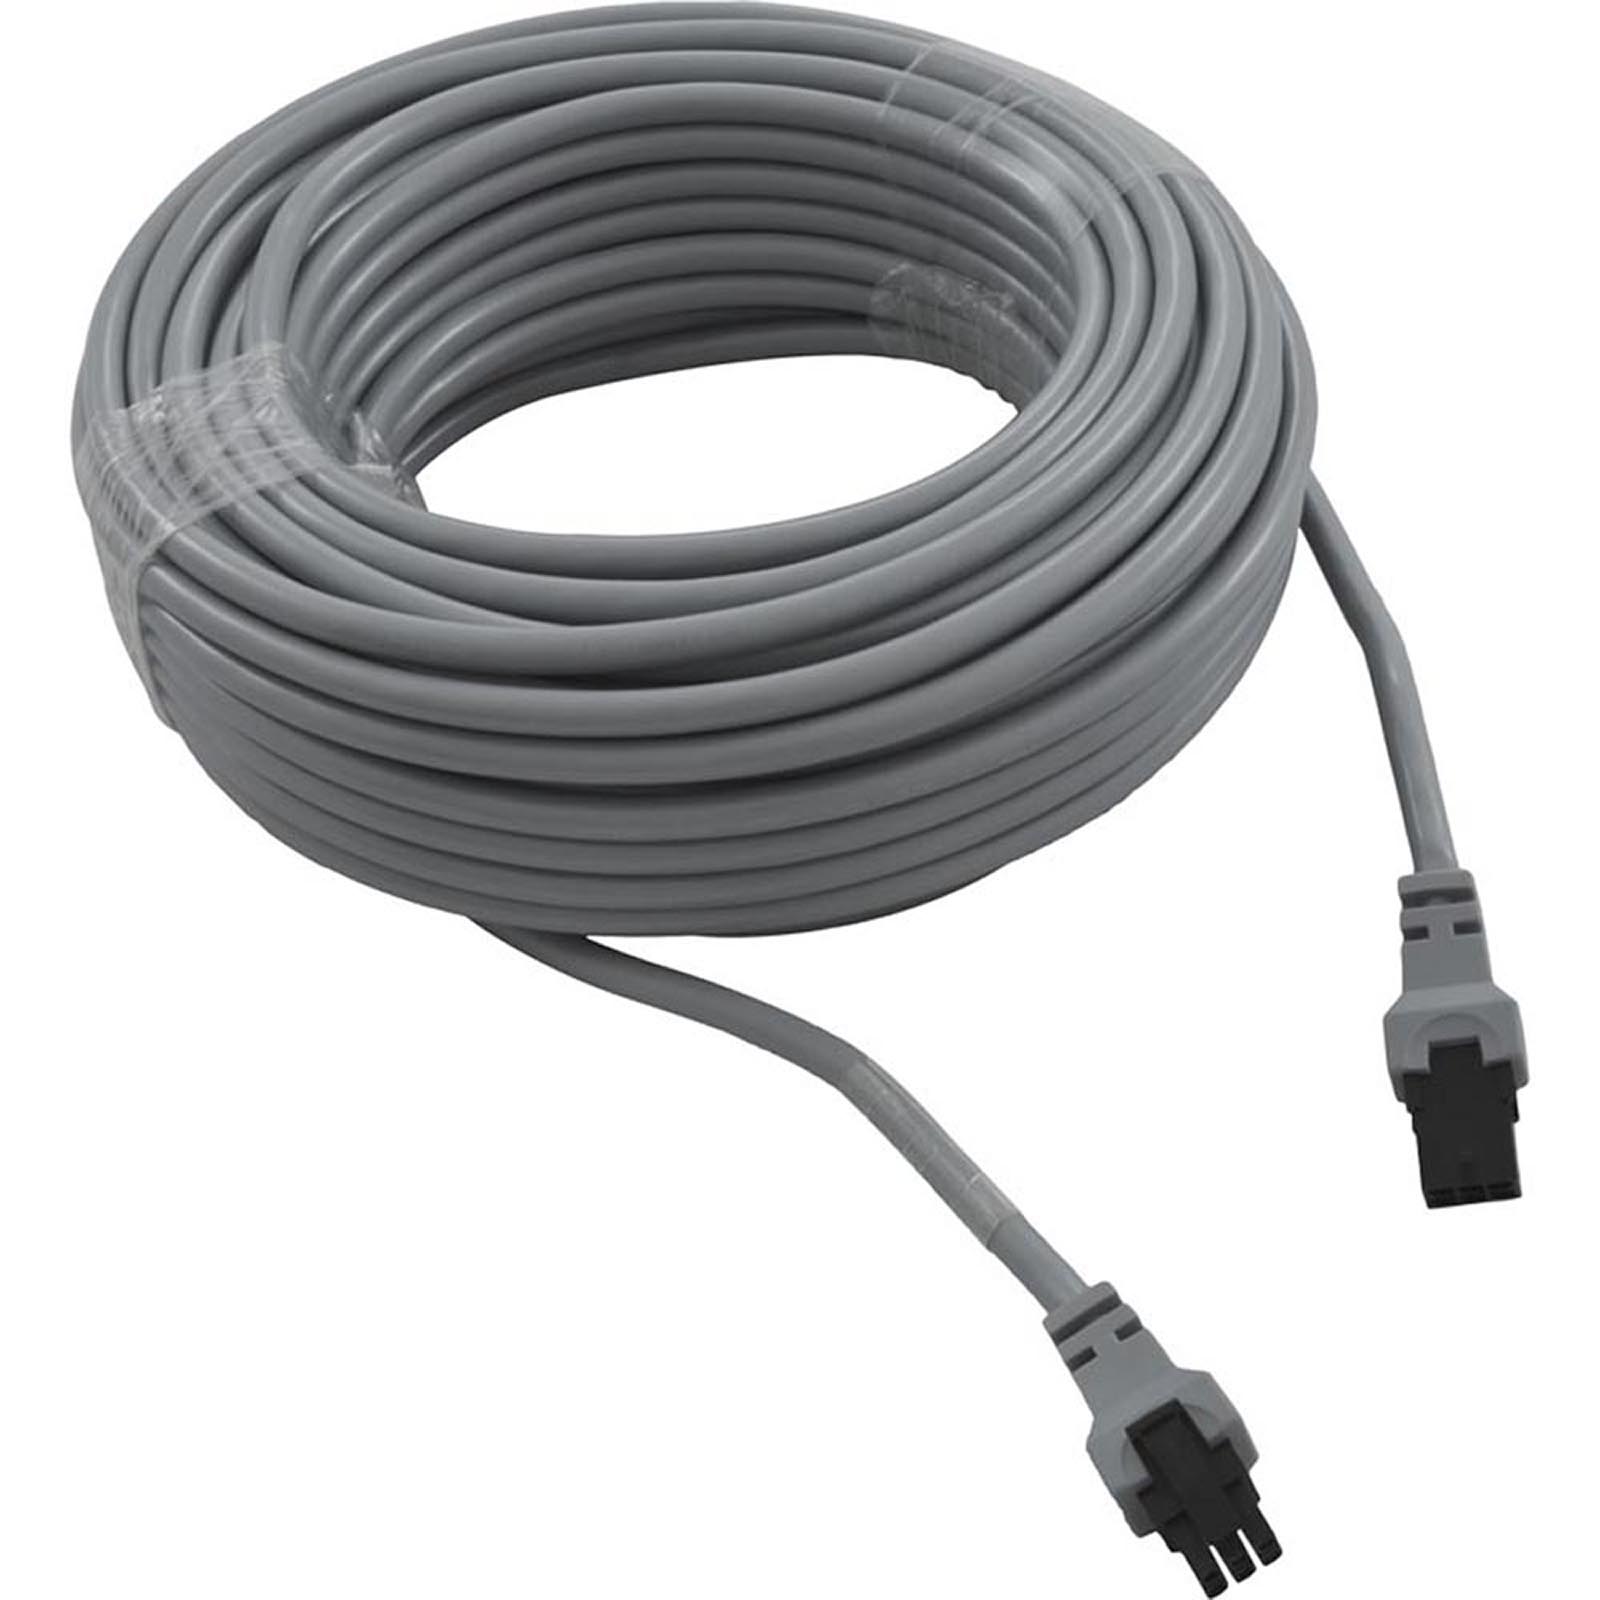 Hydro-Quip Topside extension cable